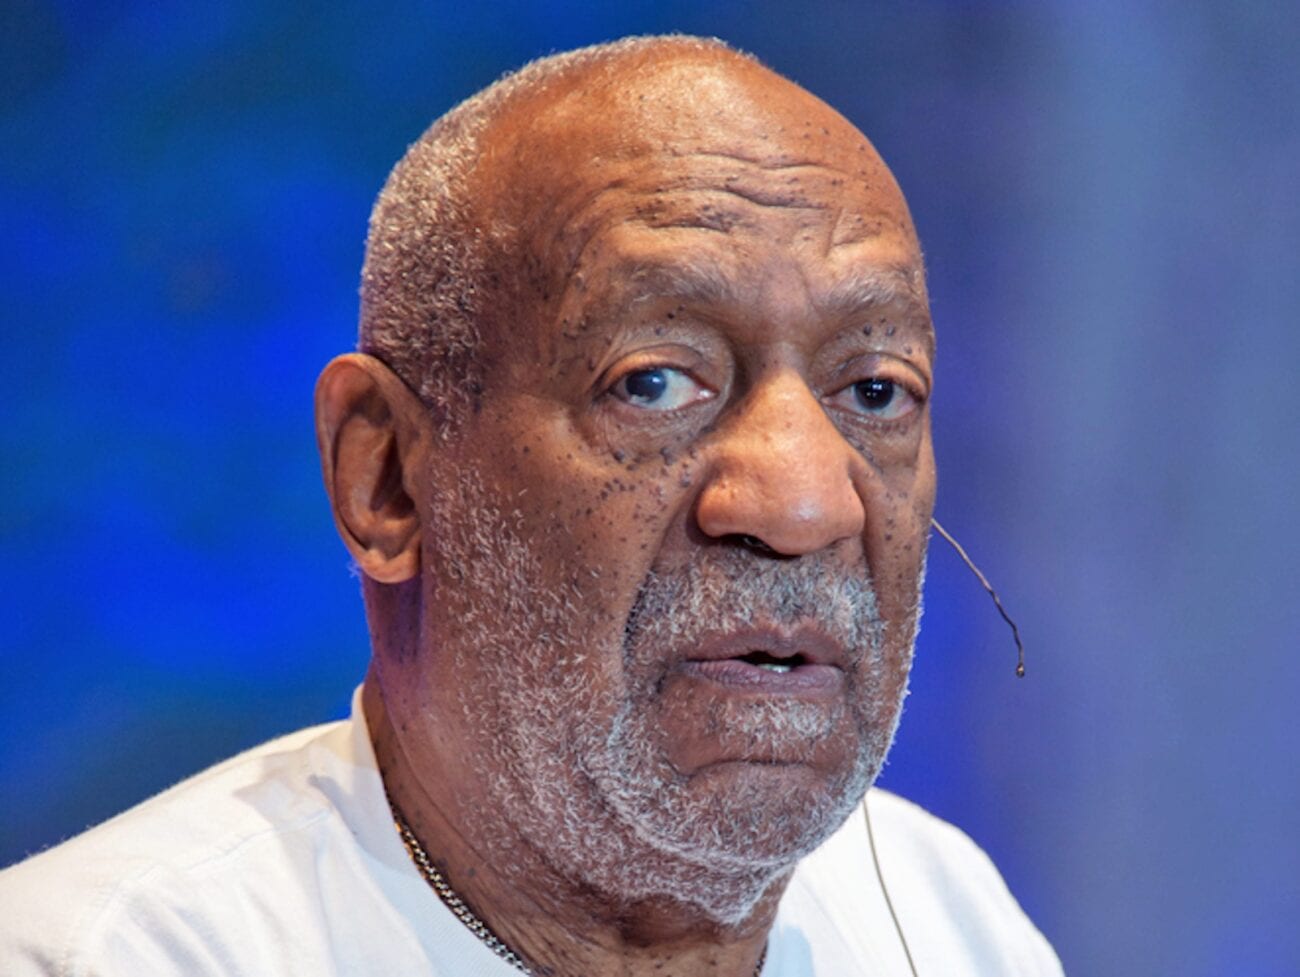 Bill Cosby was already sentenced, so how did he managed to get an appeal for his case? The PASC reopened the case after sentencing based on two arguments.